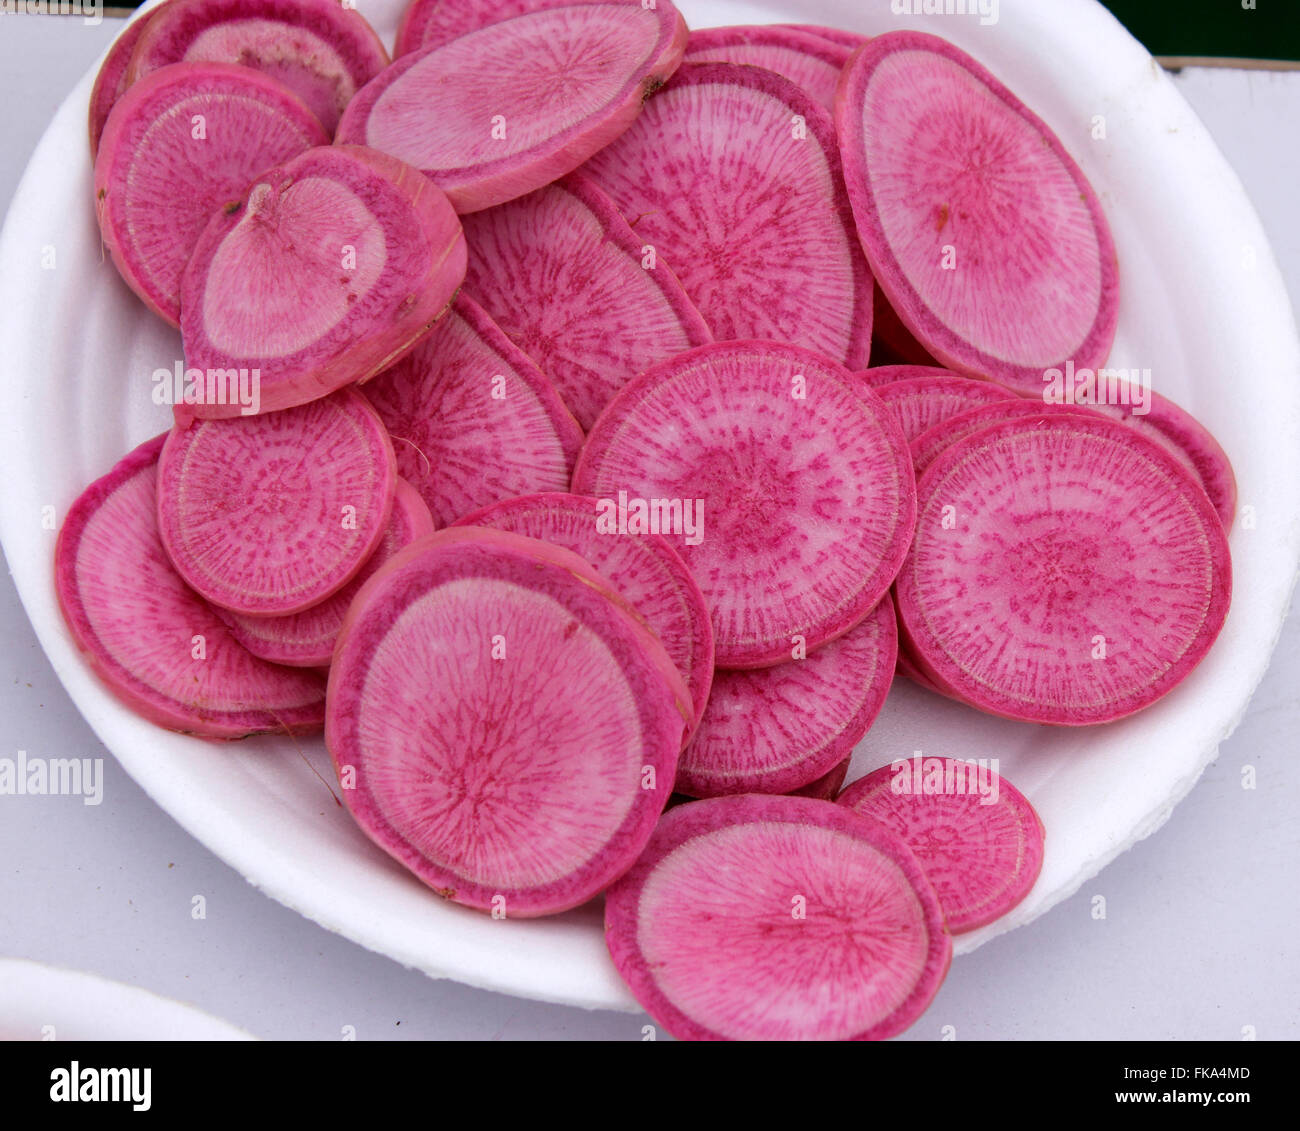 Raphanus sativus, PUSA Gulabi radish, sliced, cultivar with long rose coloured roots, commonly used in salads, vegetable crop Stock Photo